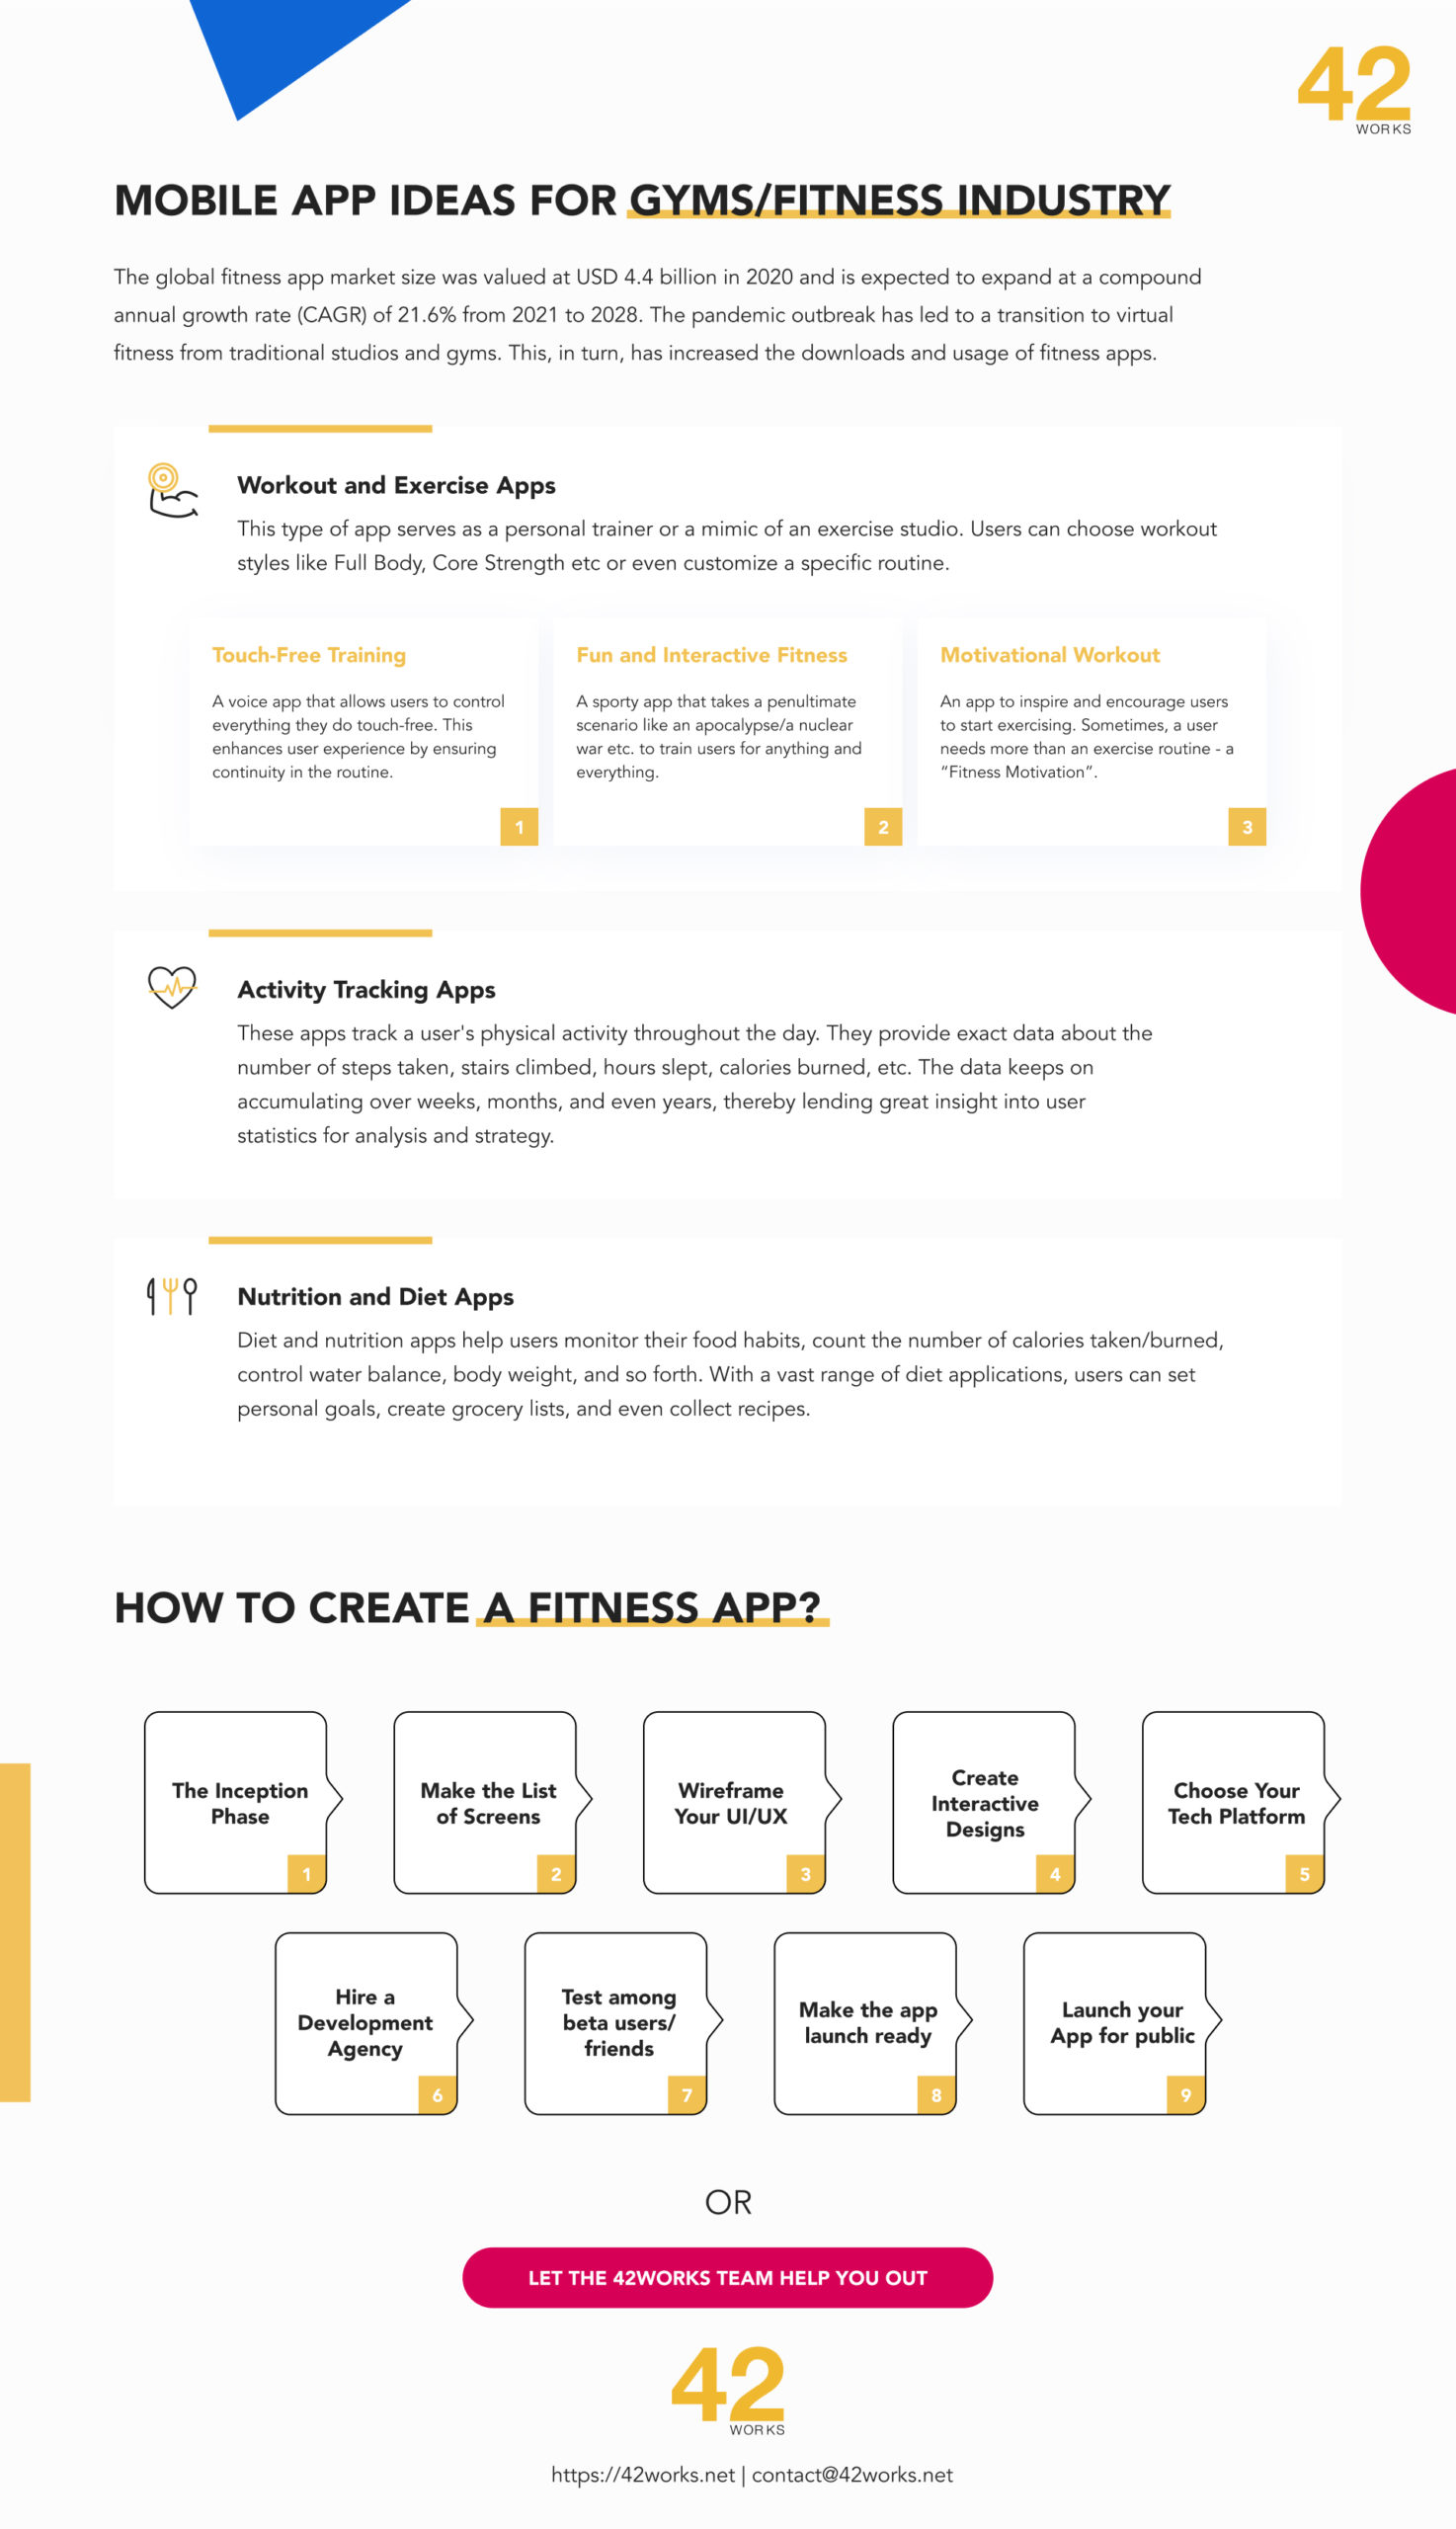 Mobile app ideas for fitness industry 42works